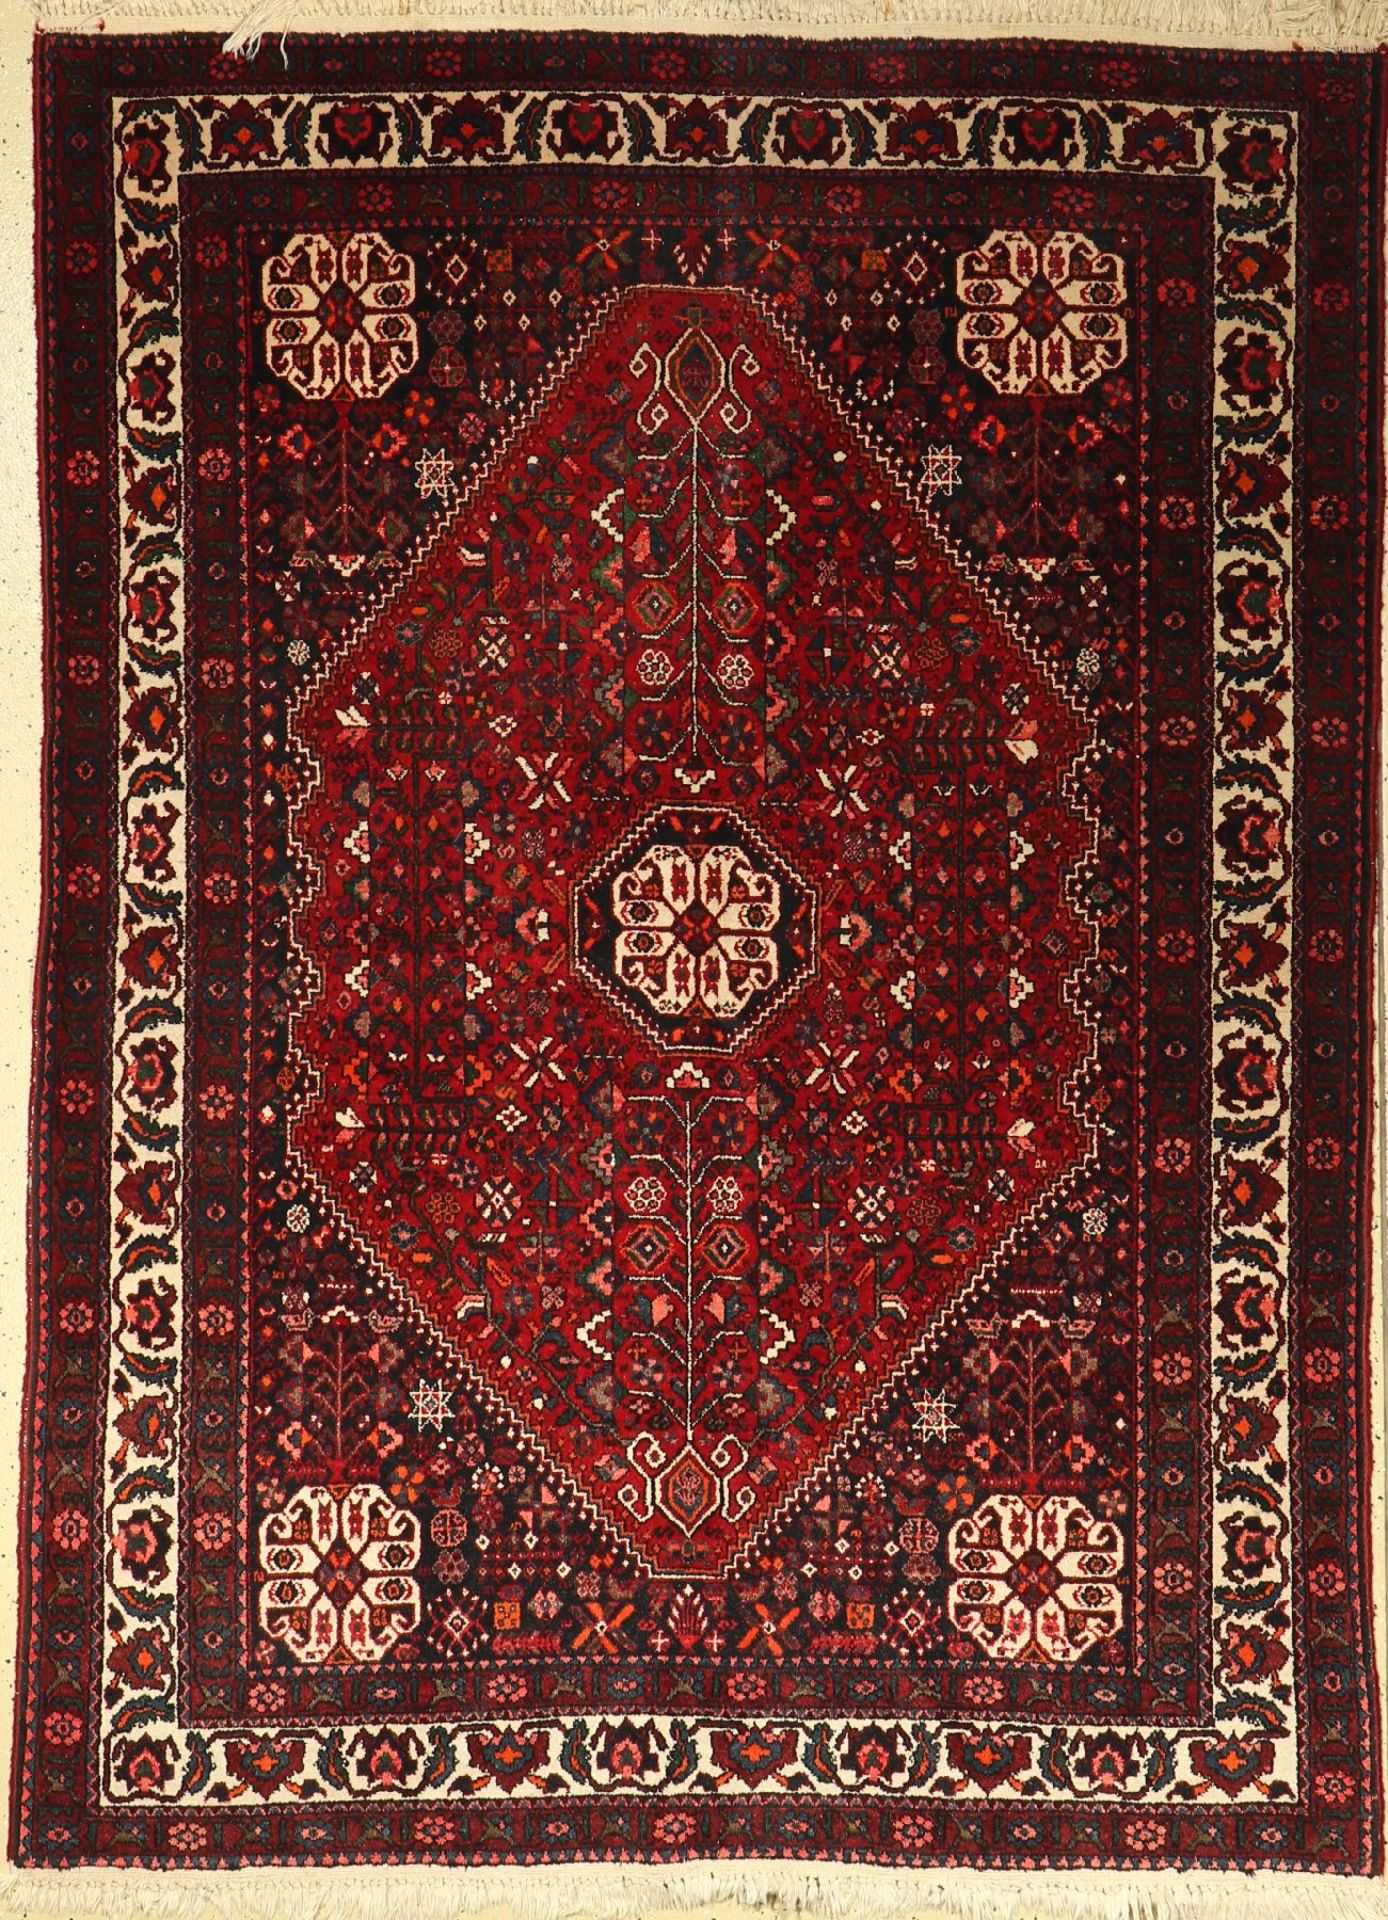 Abadeh, Persia, approx. 60 years, wool on cotton, approx. 205 x 152 cm, condition: 2-3. Auction: